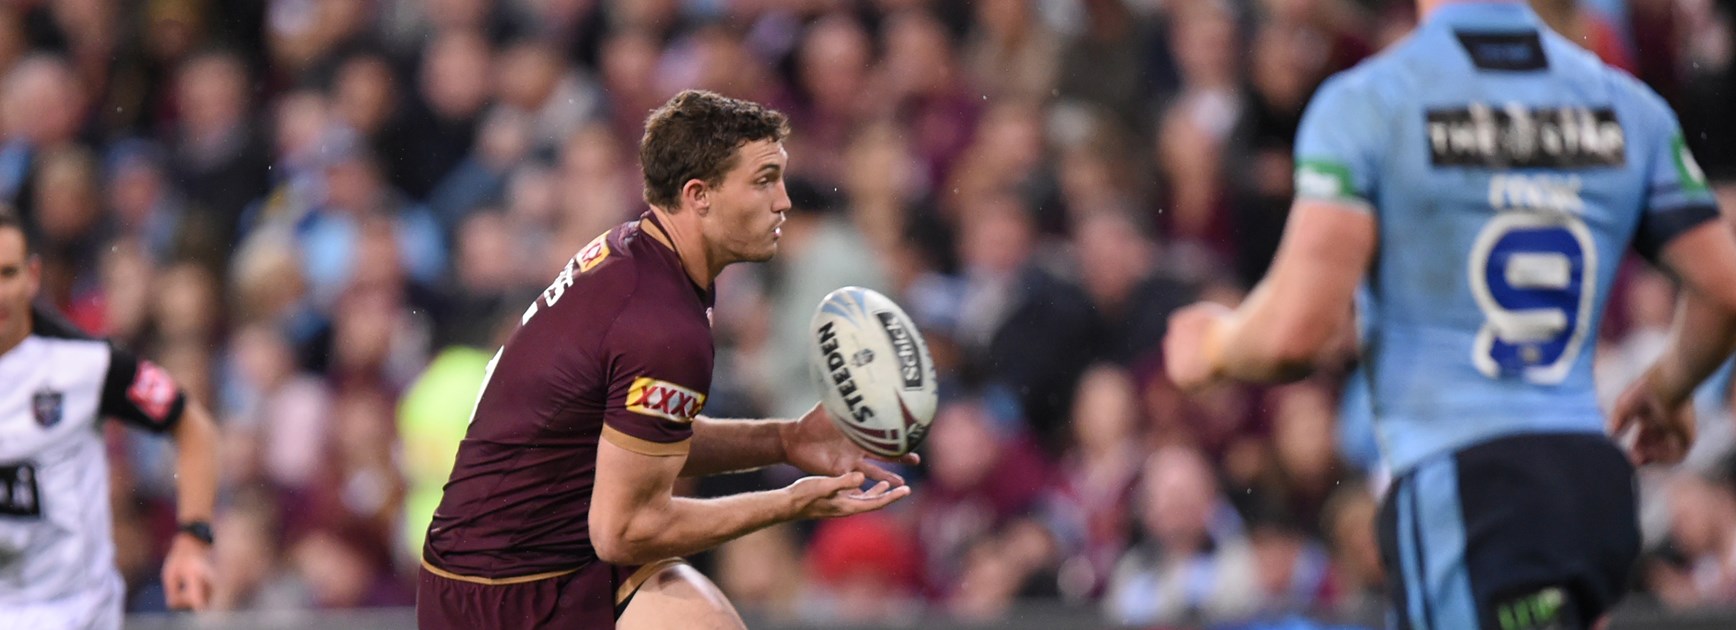 Oates stars as Broncos shore up finals hopes with win over Rabbitohs